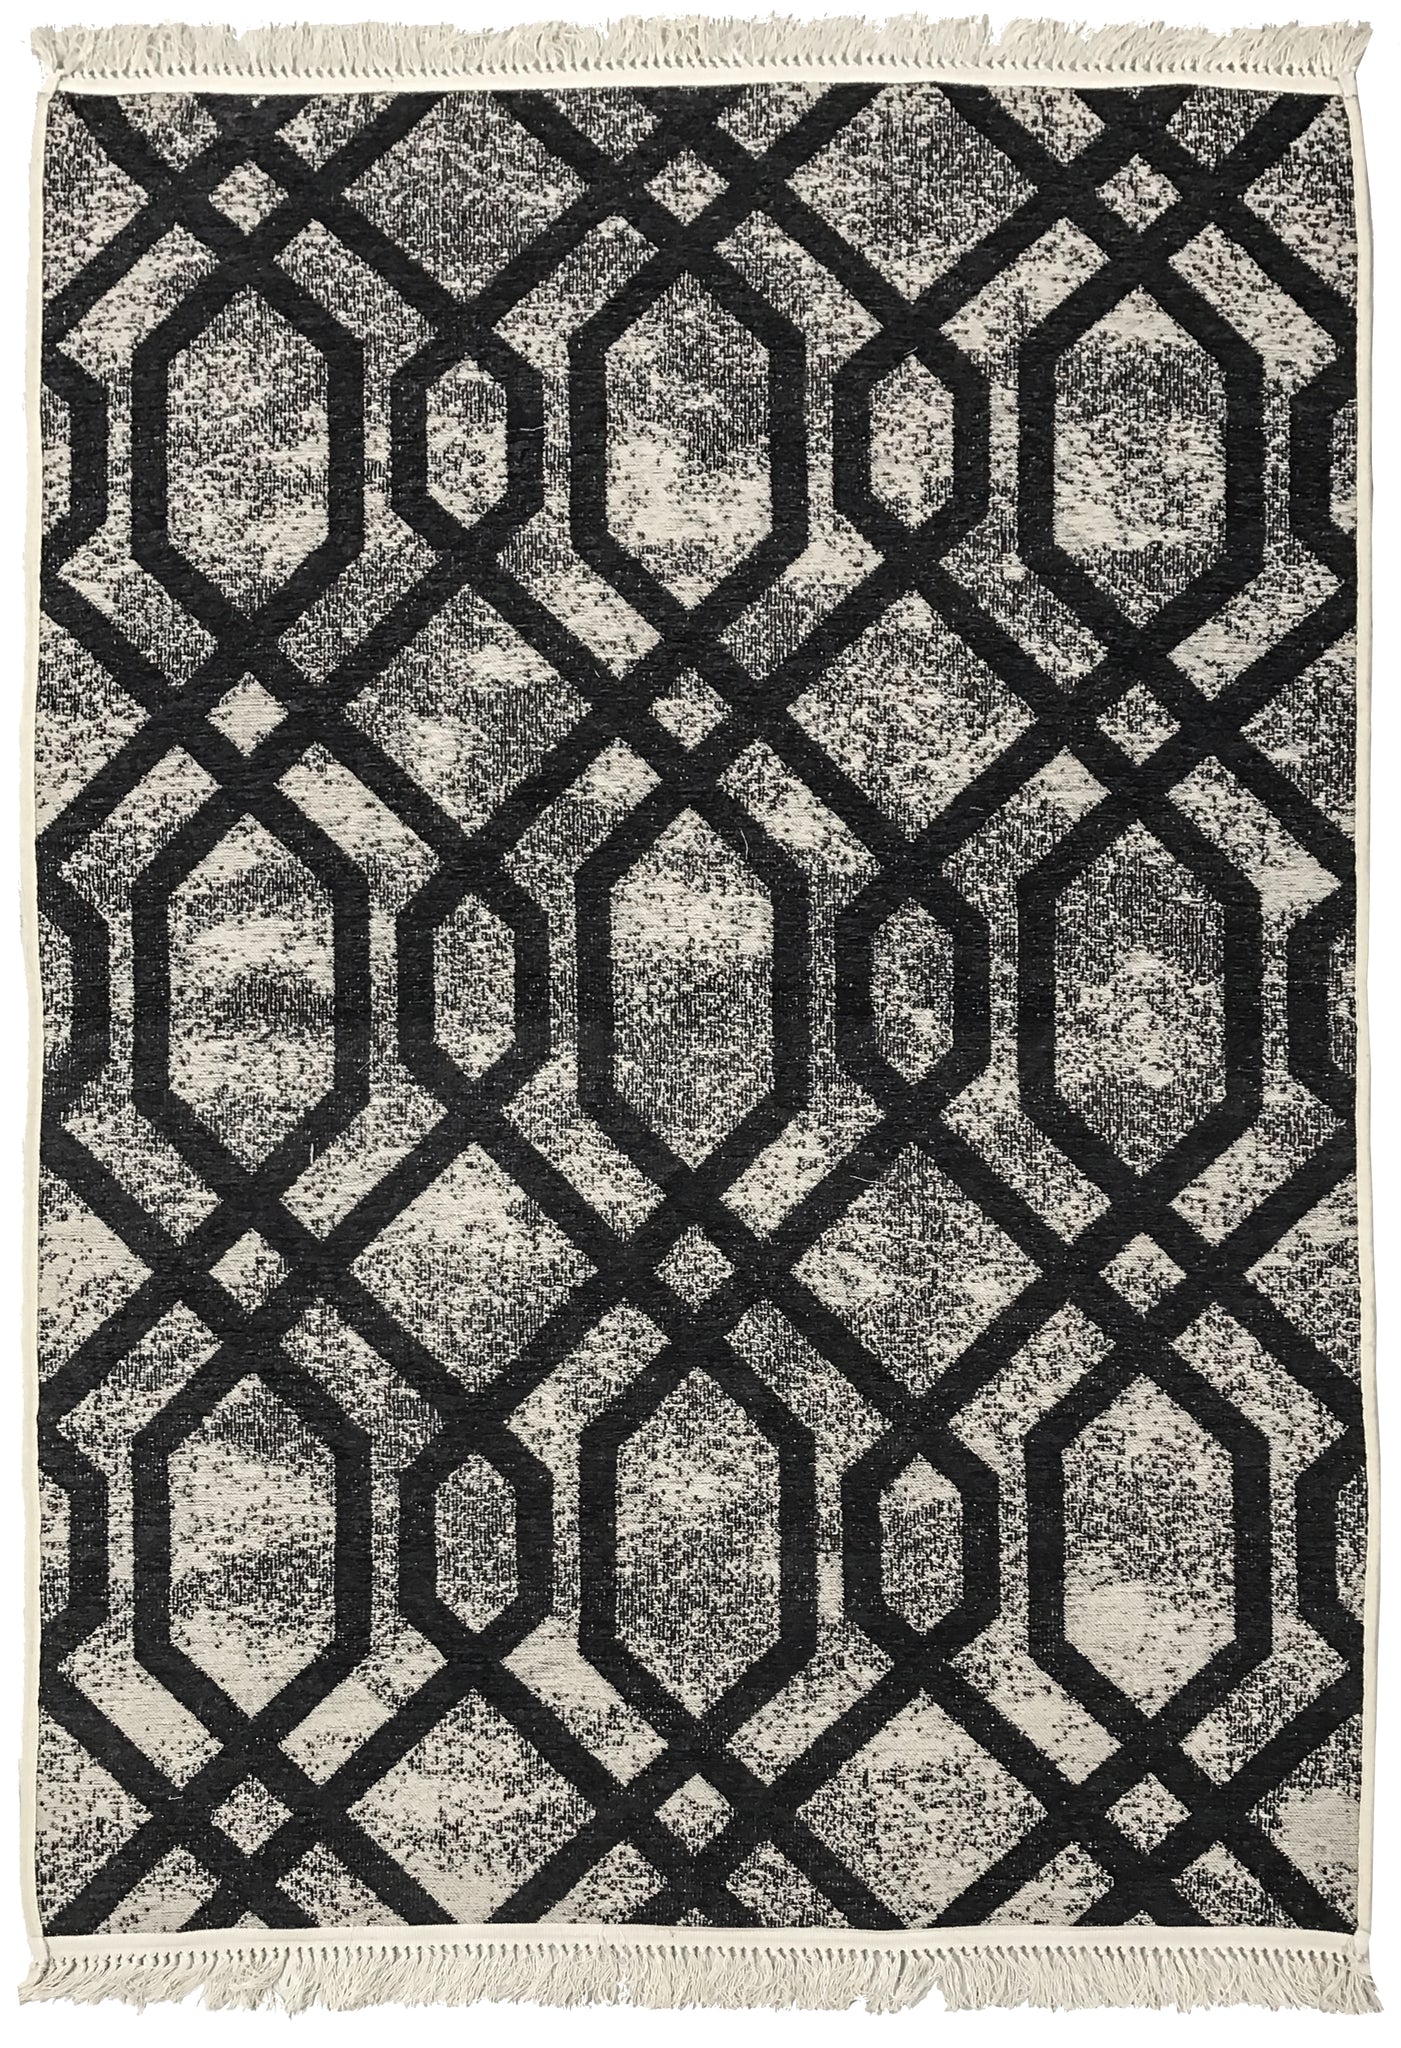 Washable Area rug | Simon & Yildirim Reversible Duality | Black & Beige | 5x8 | By MotherRuggers.com | Machine Washable | Jacquard Woven | Uniquely Reversible | Pet Friendly | Kid Friendly | Machine Wash | Line Dry | Living Room | Covered Patio | Entry Way | Bedroom | High-Traffic | Two-year warranty with proper care | Shake or light Vacuum | Machine Wash as needed | Dry Flat or Line Dry | Dries fast